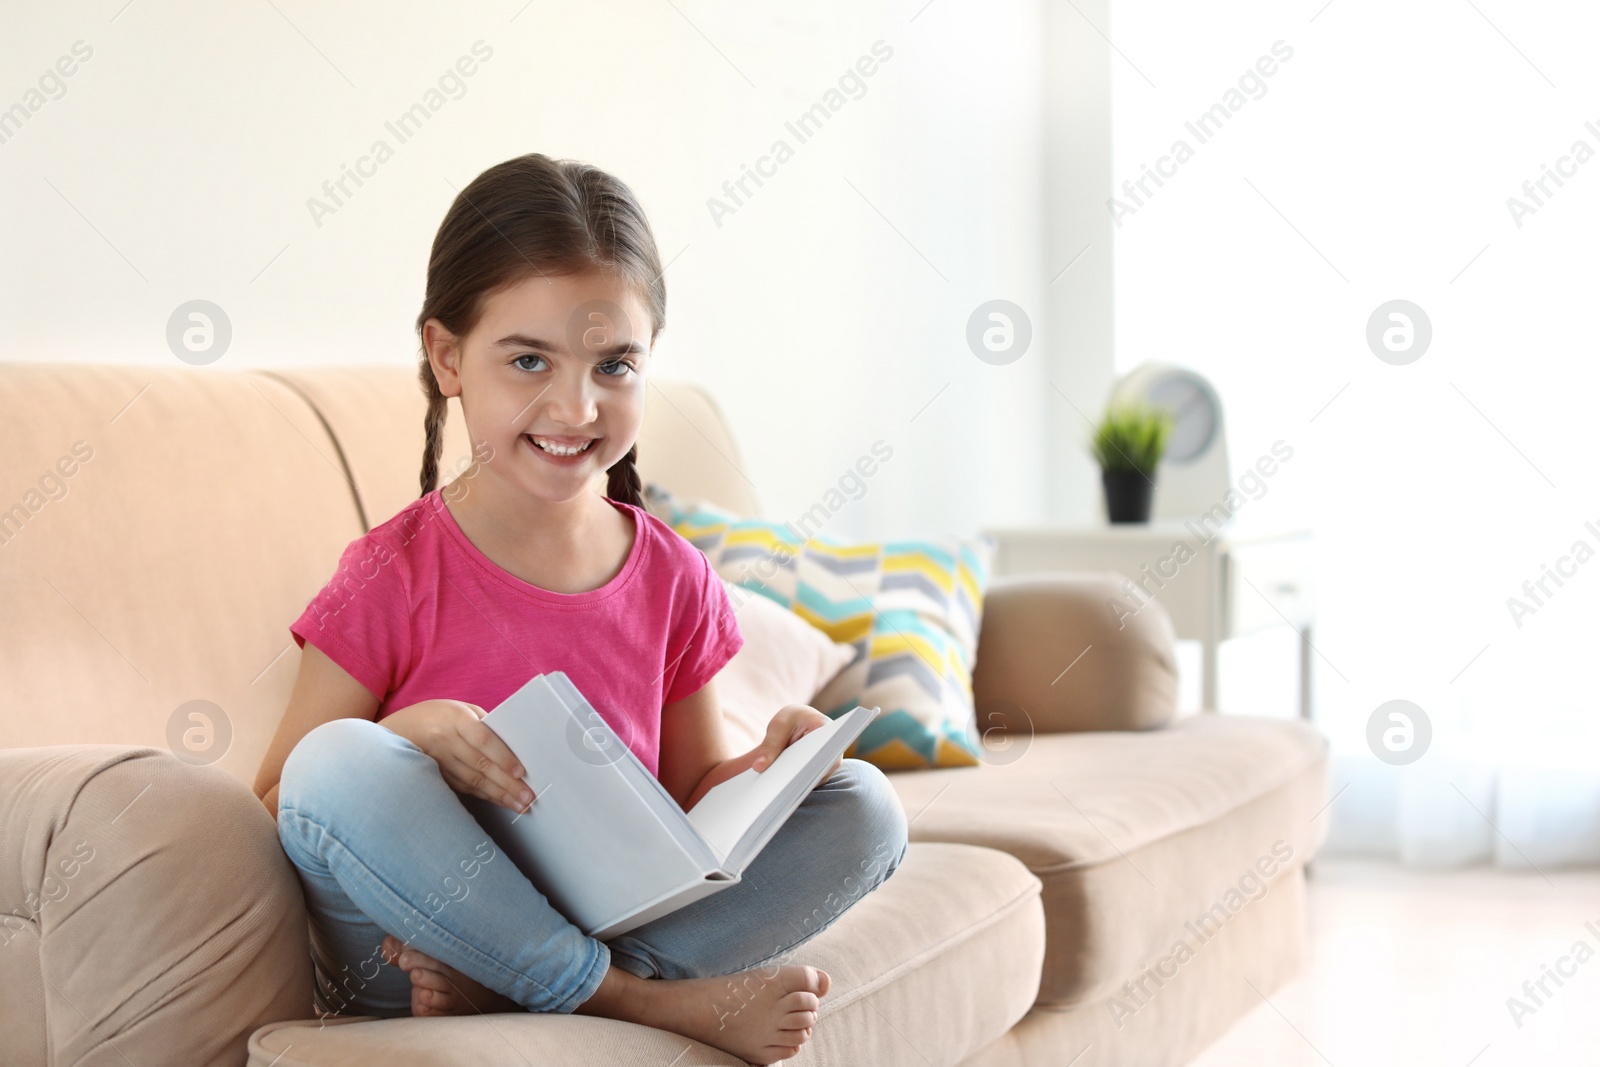 Photo of Cute child reading book on sofa indoors